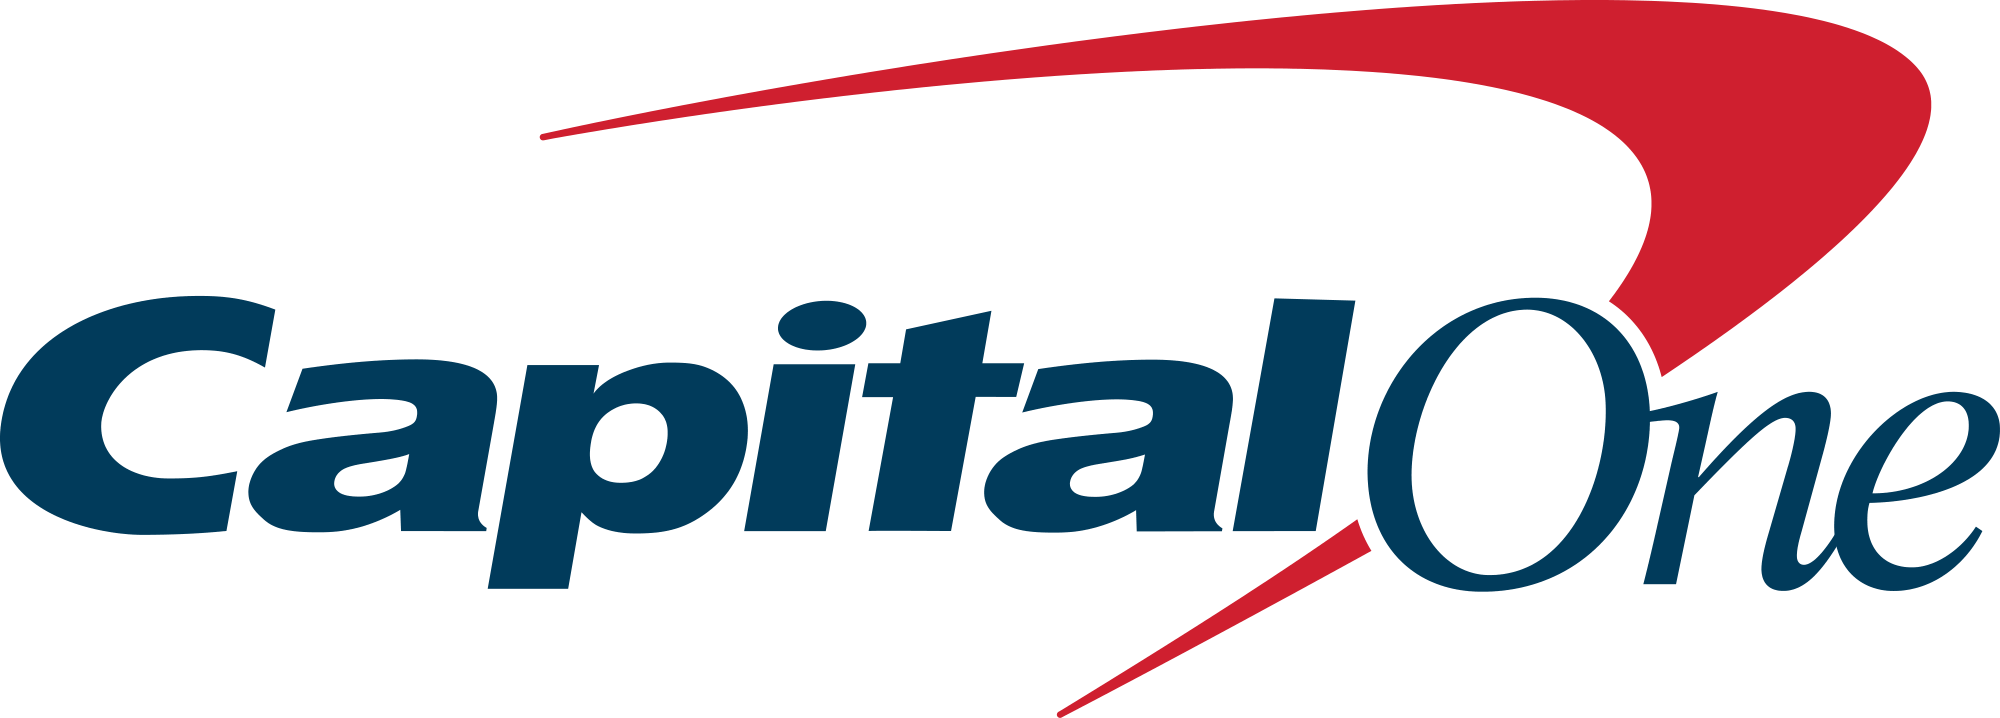 Capital One Logo 1 (002).png